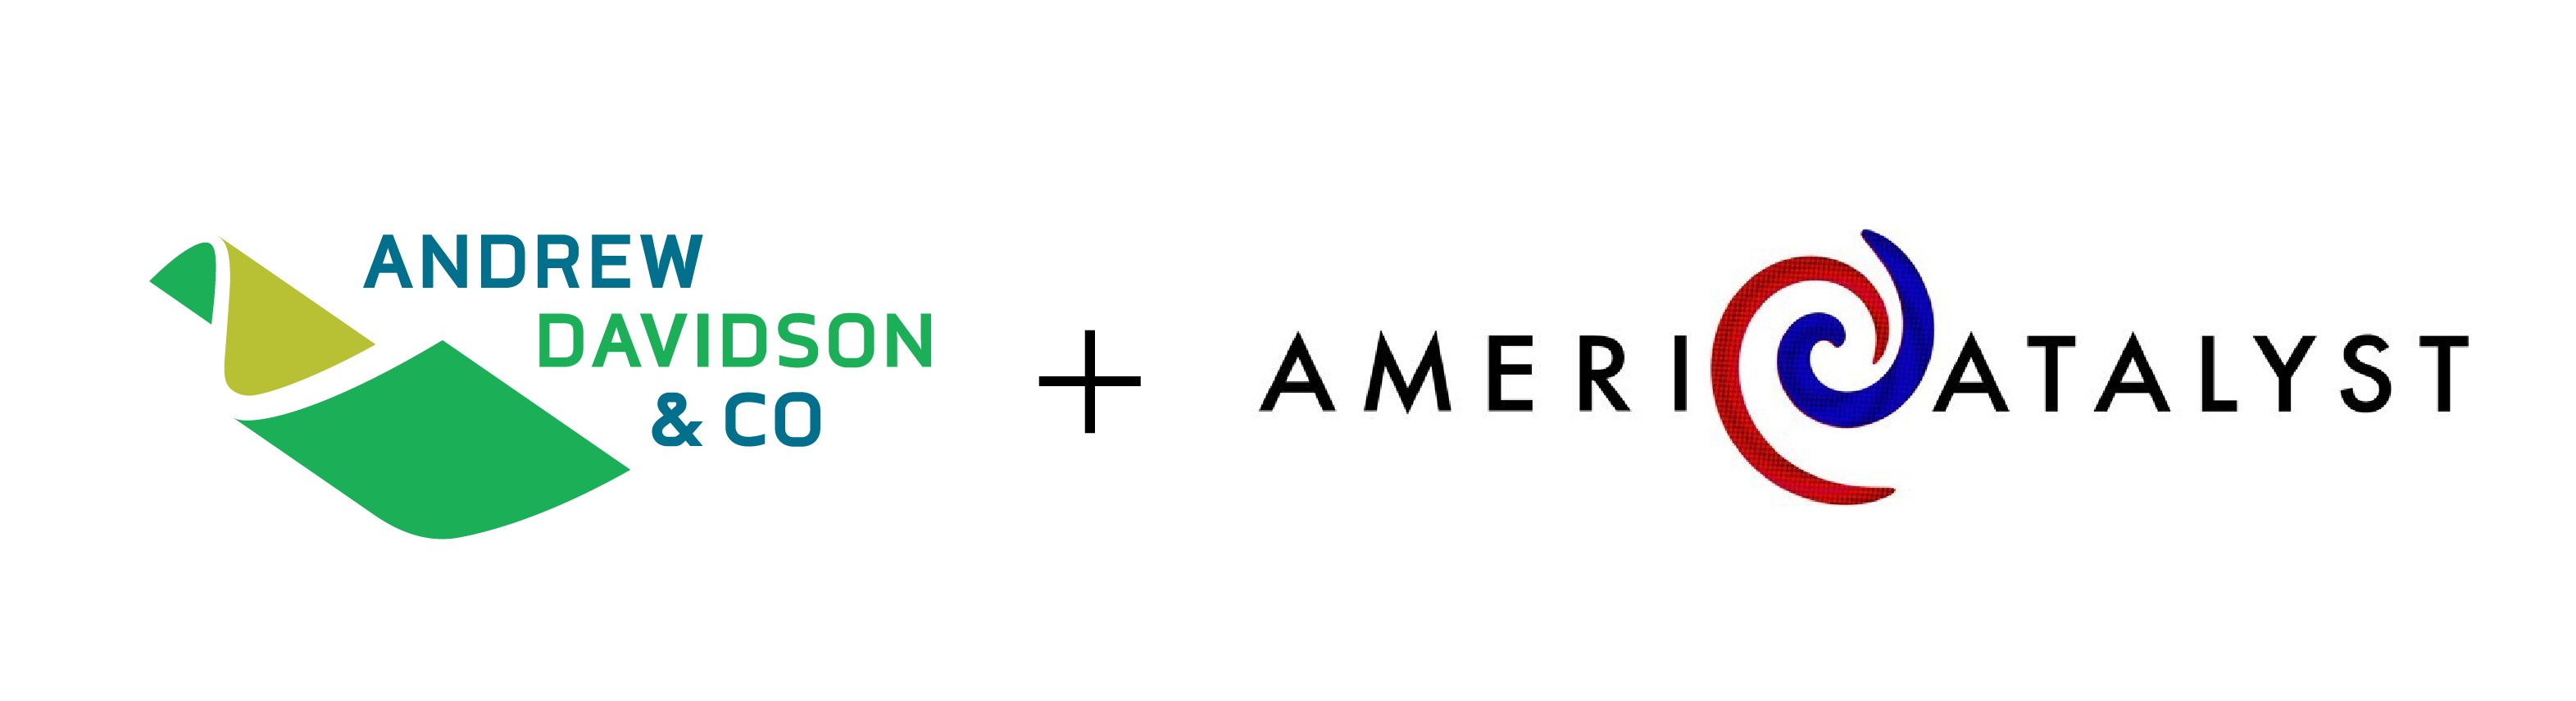 AD&Co and AmeriCatalyst logo